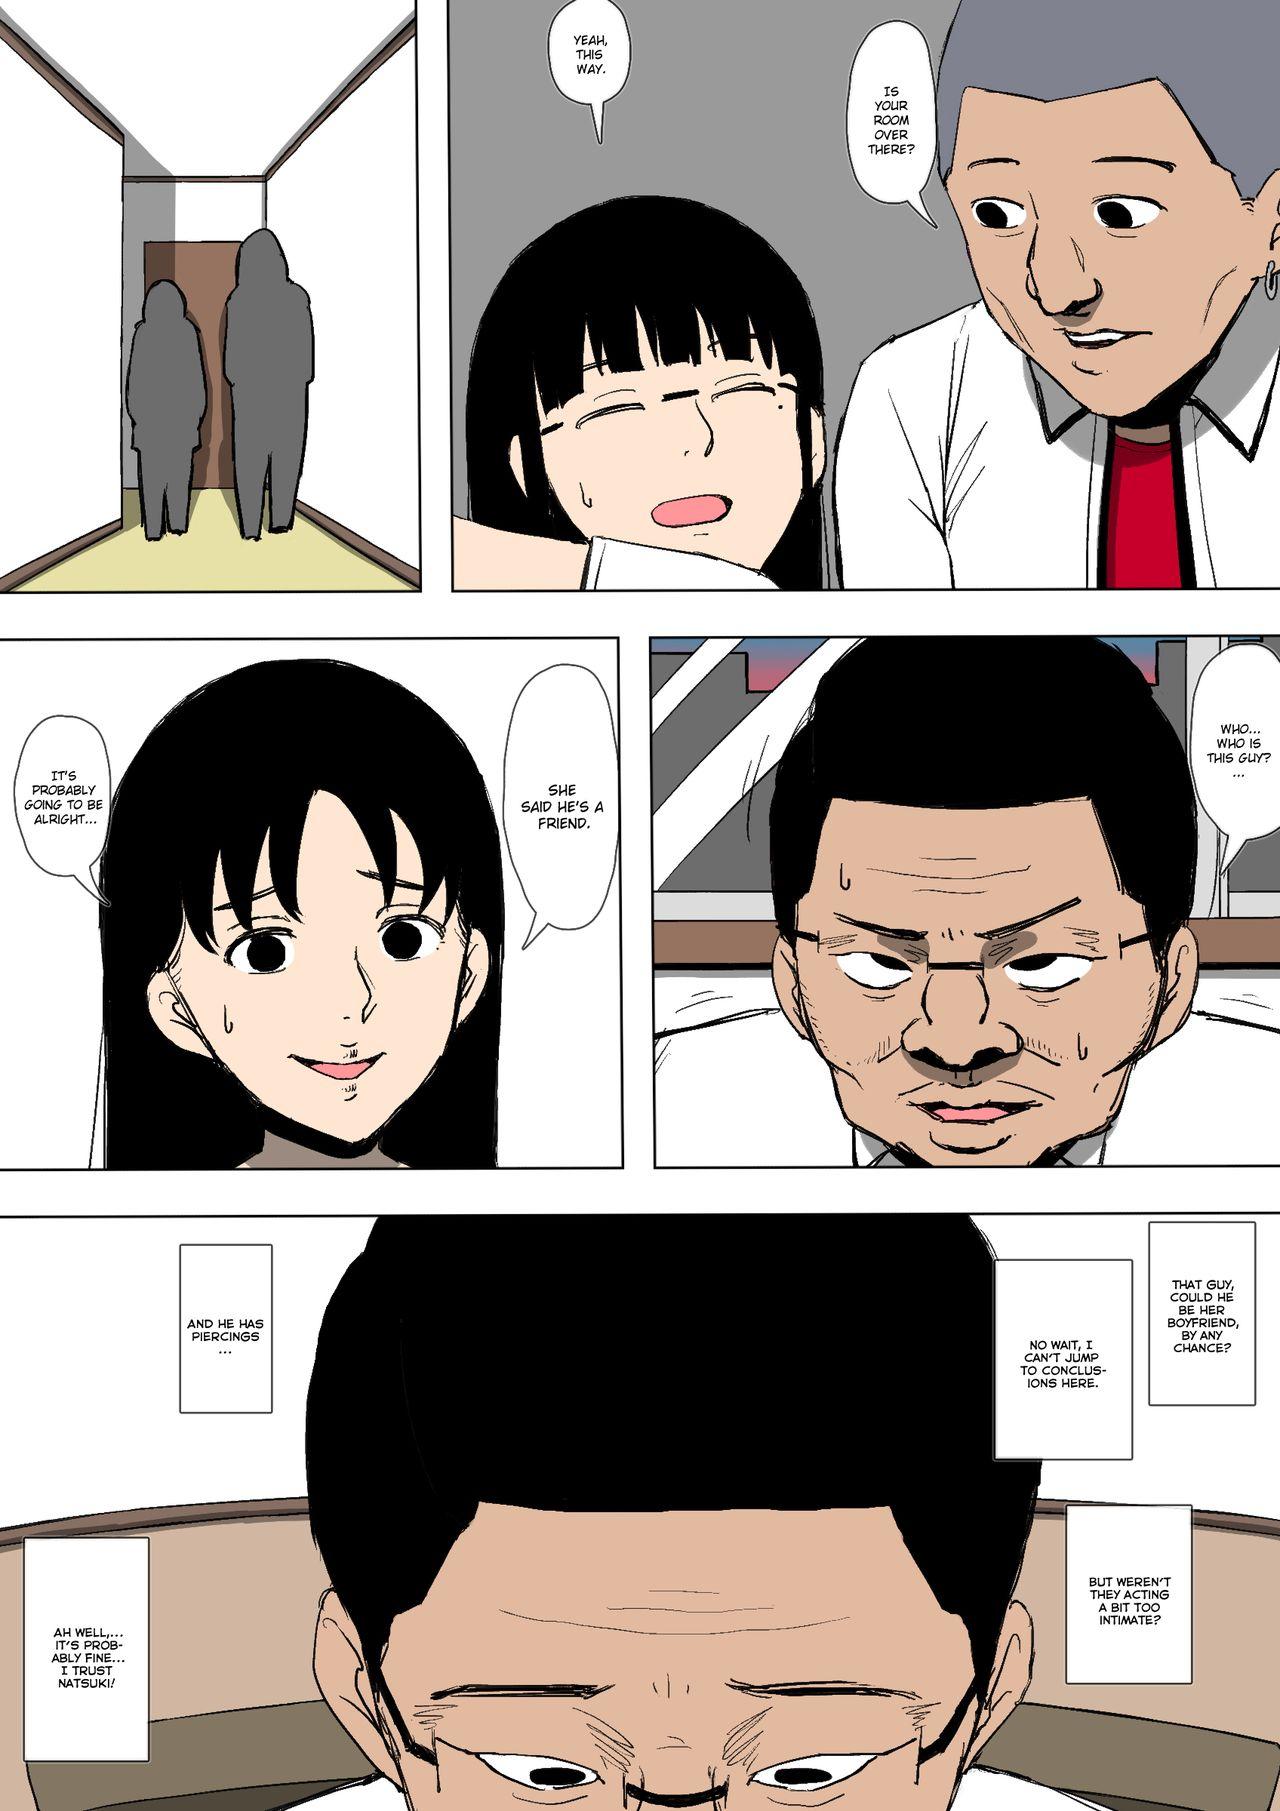 Musume ga Furyou ni Otosareteita | My Daughter was Corrupted by a Delinquent 5